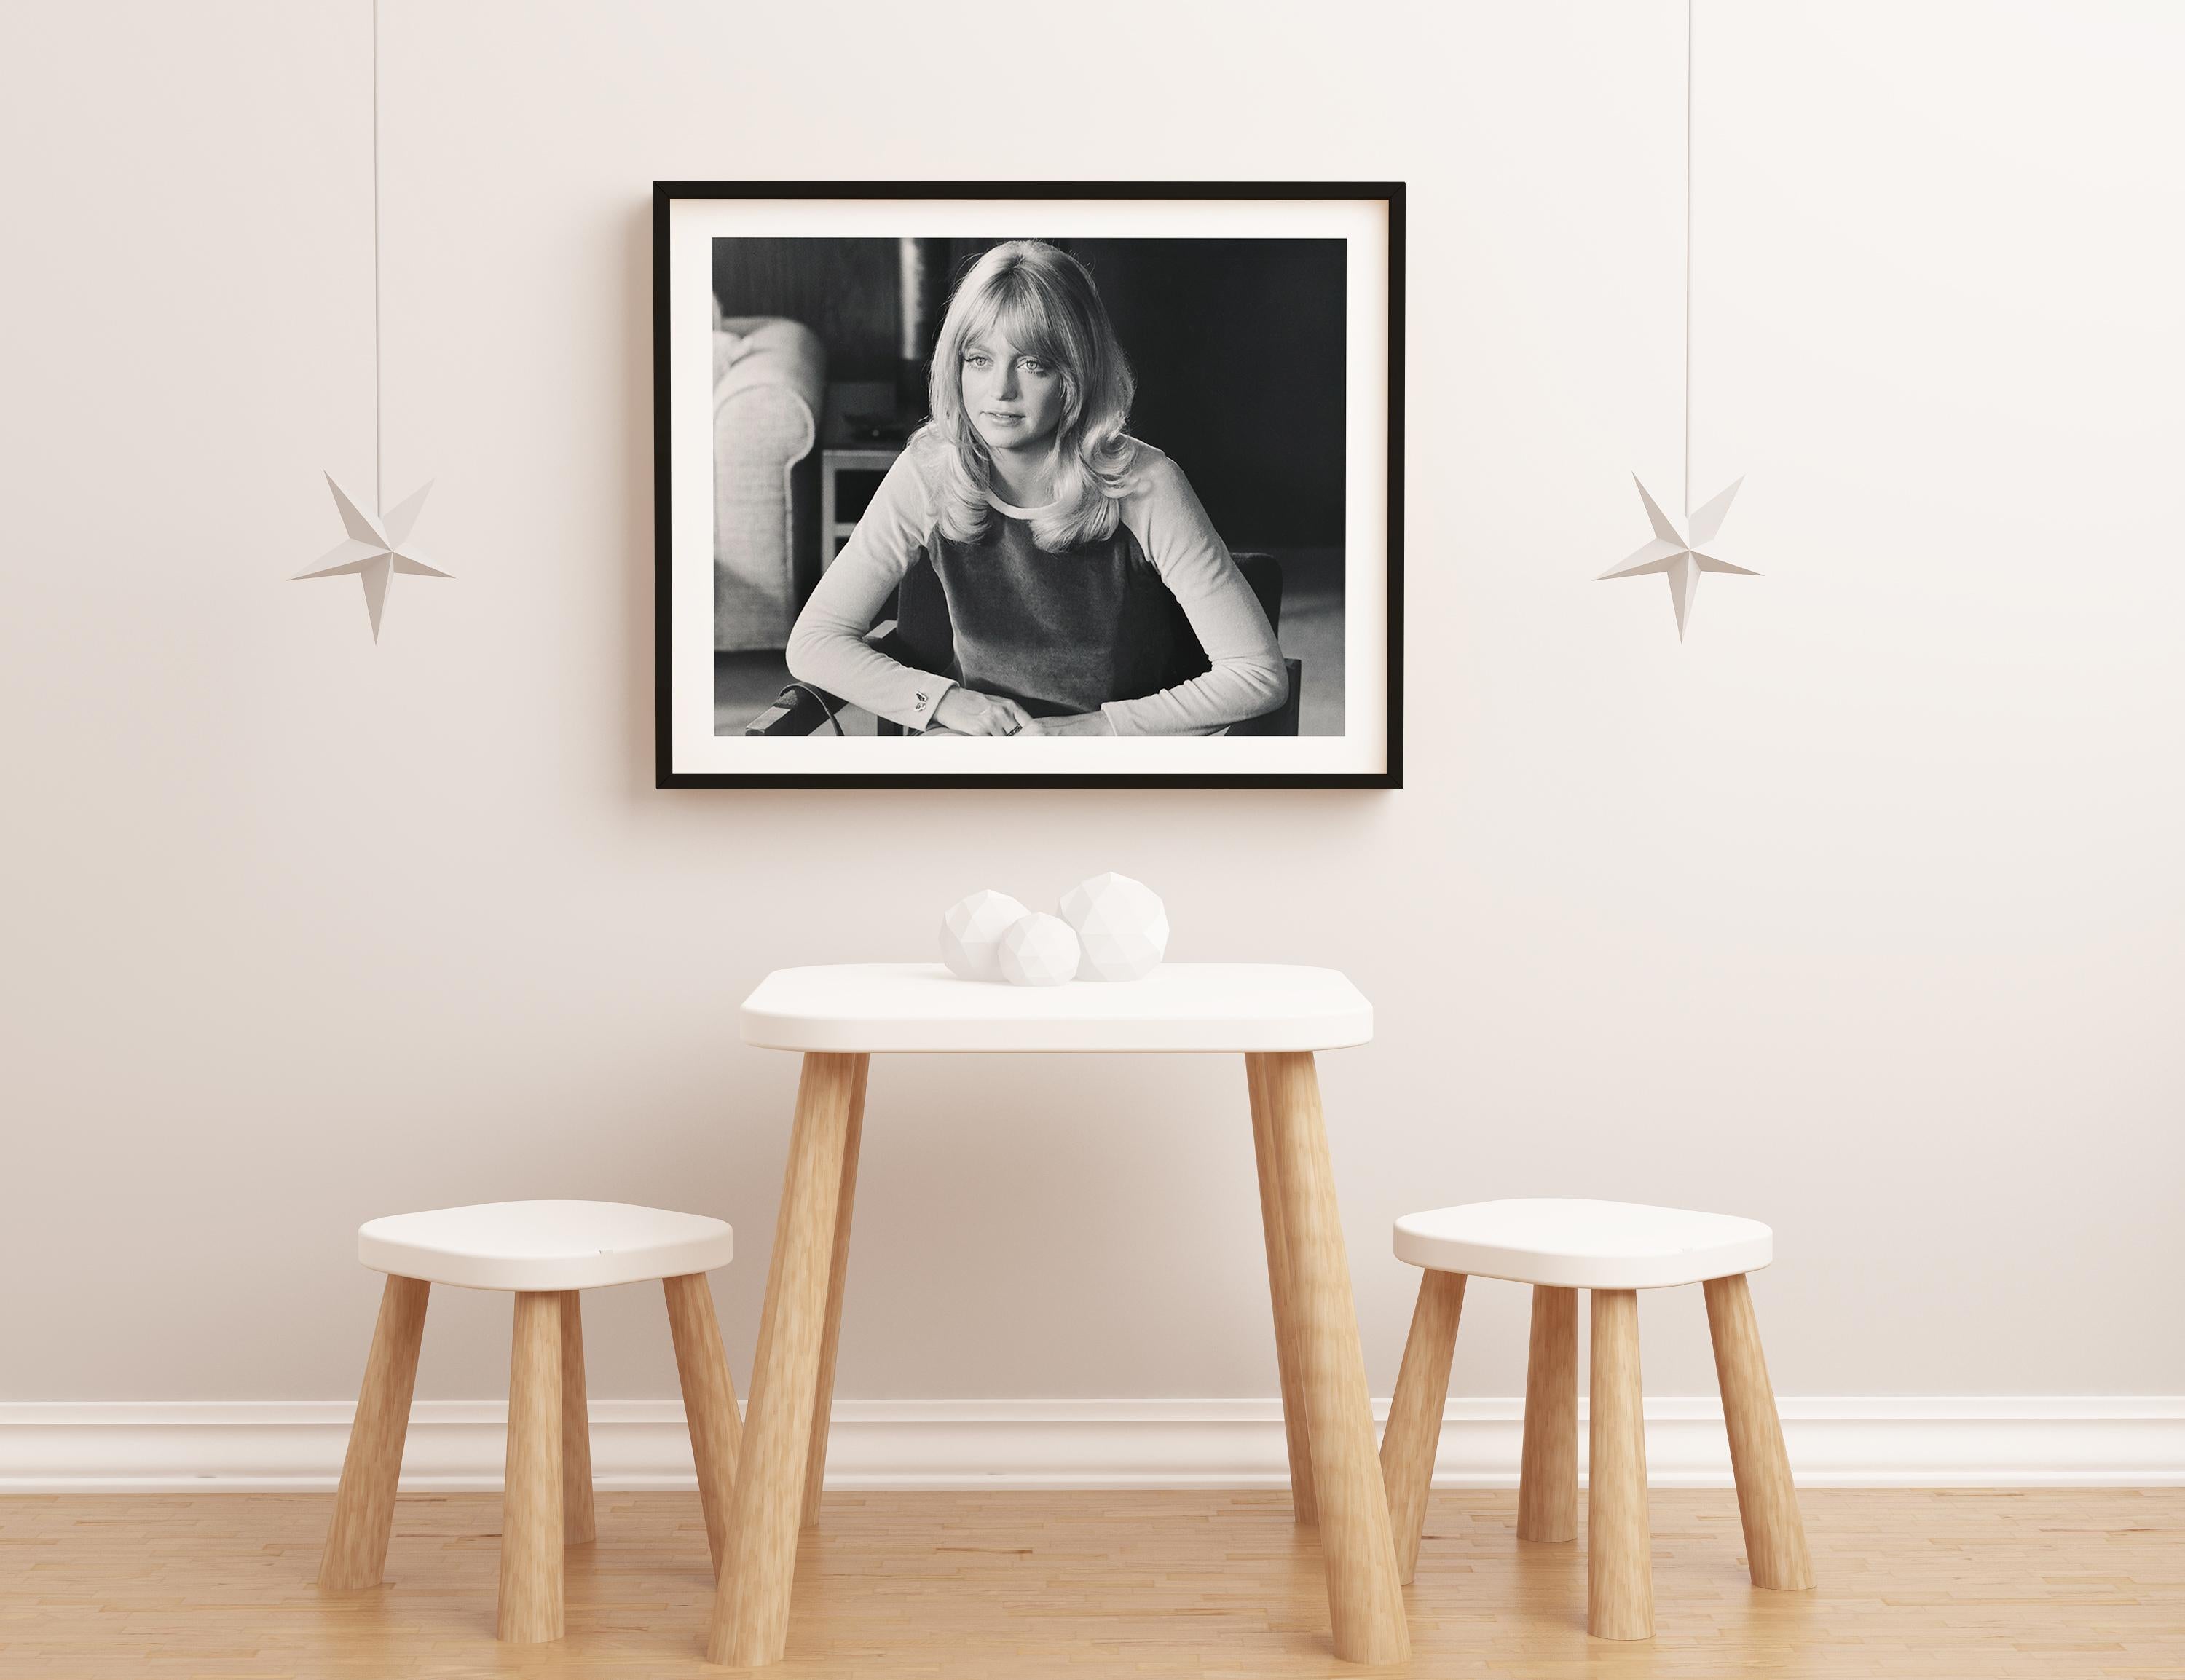 Candid and Young Goldie Hawn Fine Art Print - Black Portrait Photograph by Unknown